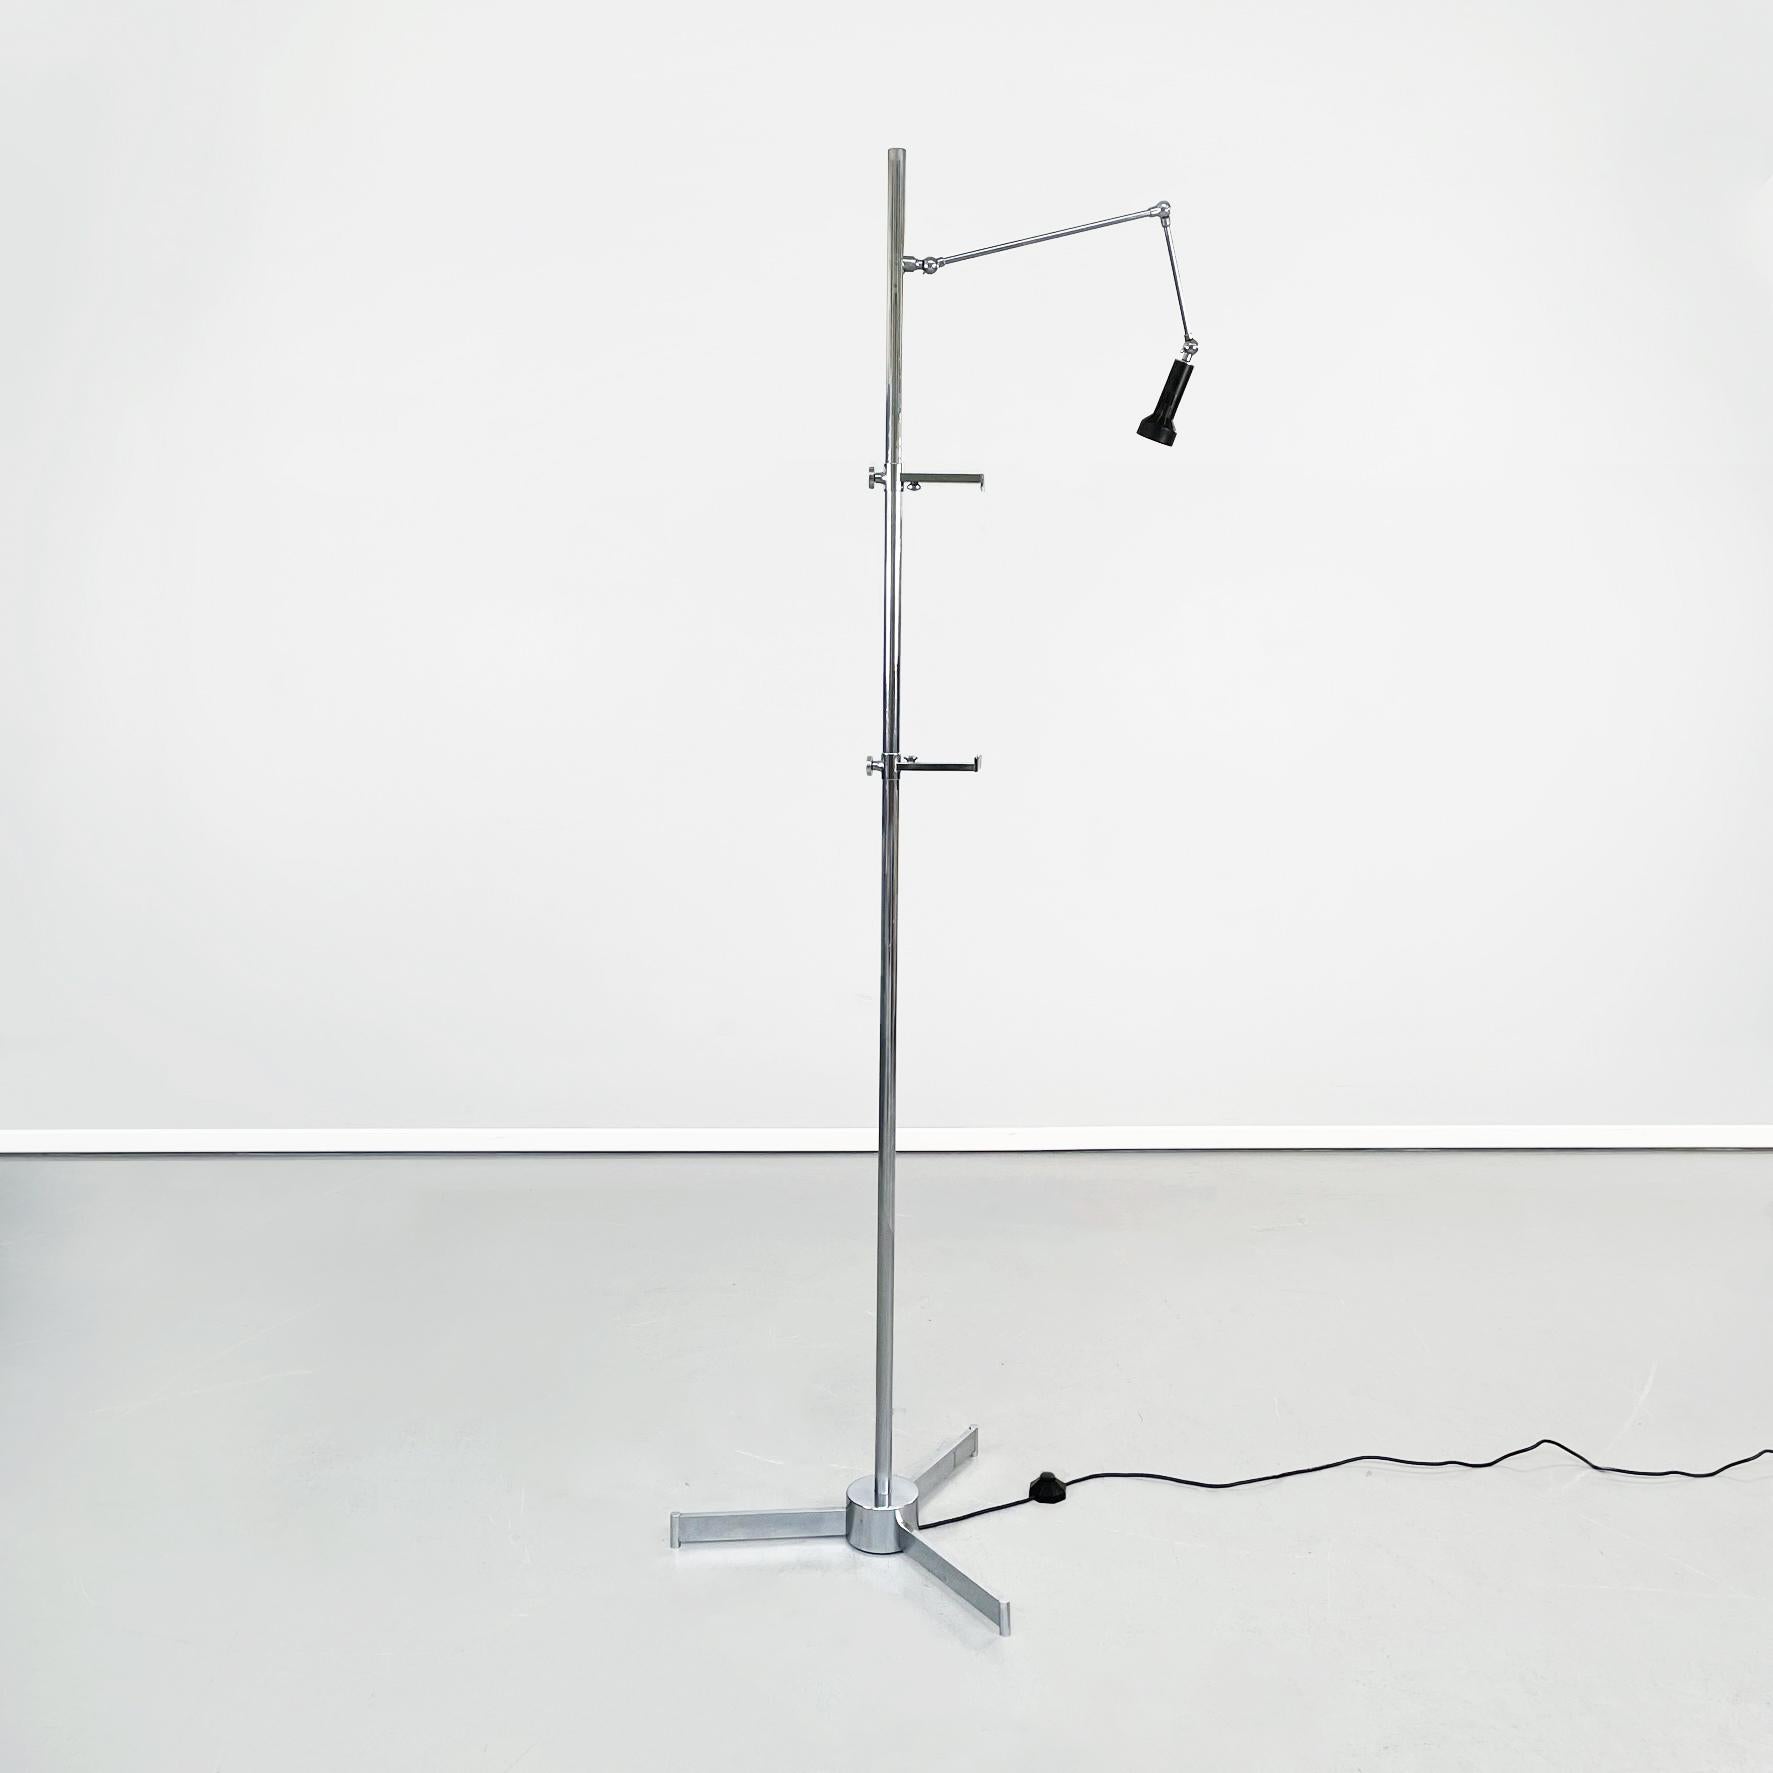 Italian mid-century Metal easel floor lamp by Angelo Lelii for Arredoluce, 1960s
Metal easel Cavalletto with directional light. The central structure is composed of a tubular on which there are two adjustable supports for the switchboard. Above